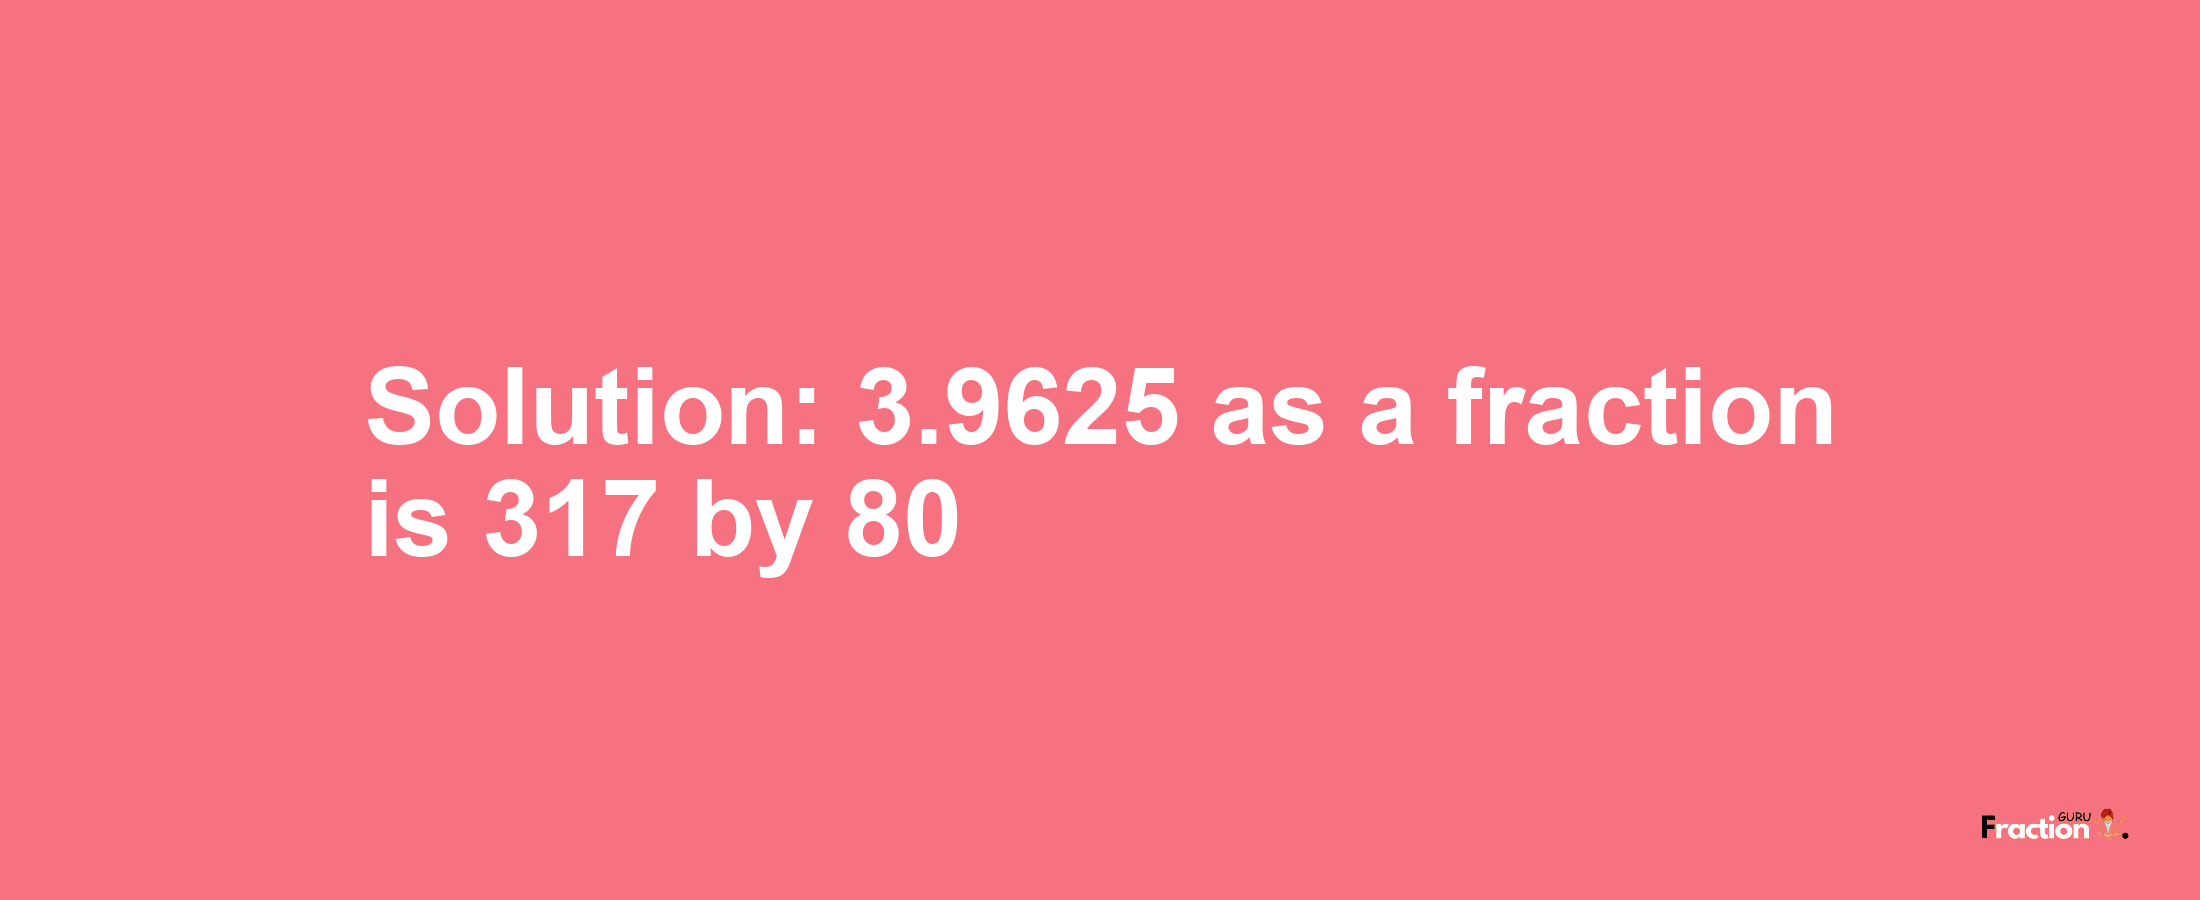 Solution:3.9625 as a fraction is 317/80